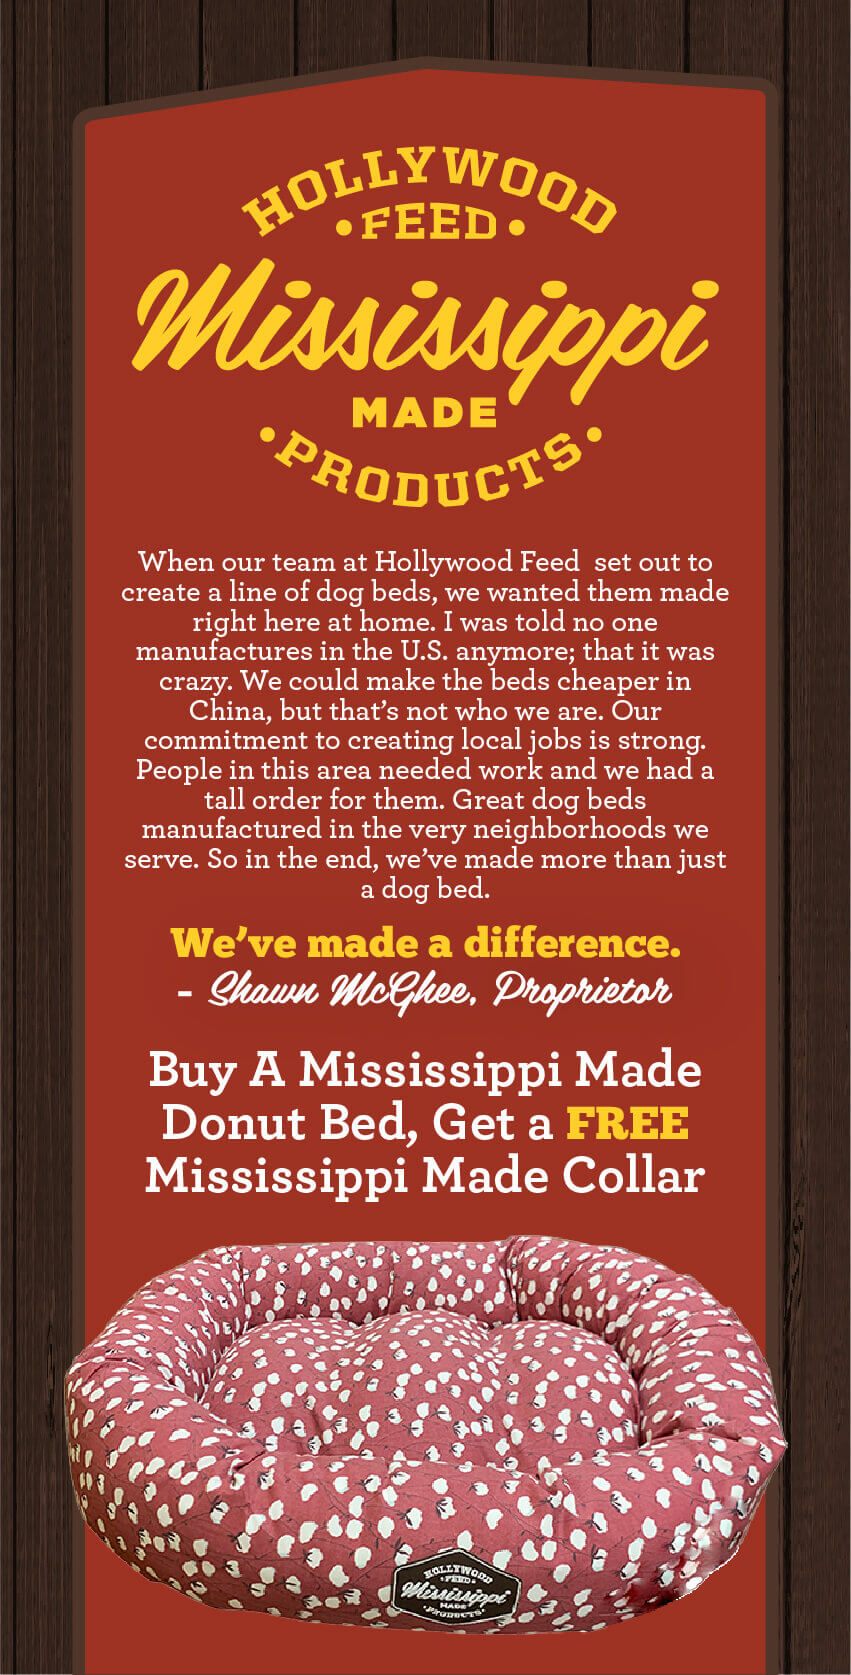 Buy A Mississippi Made Donut Bed, Get a Free Mississippi Made Collar